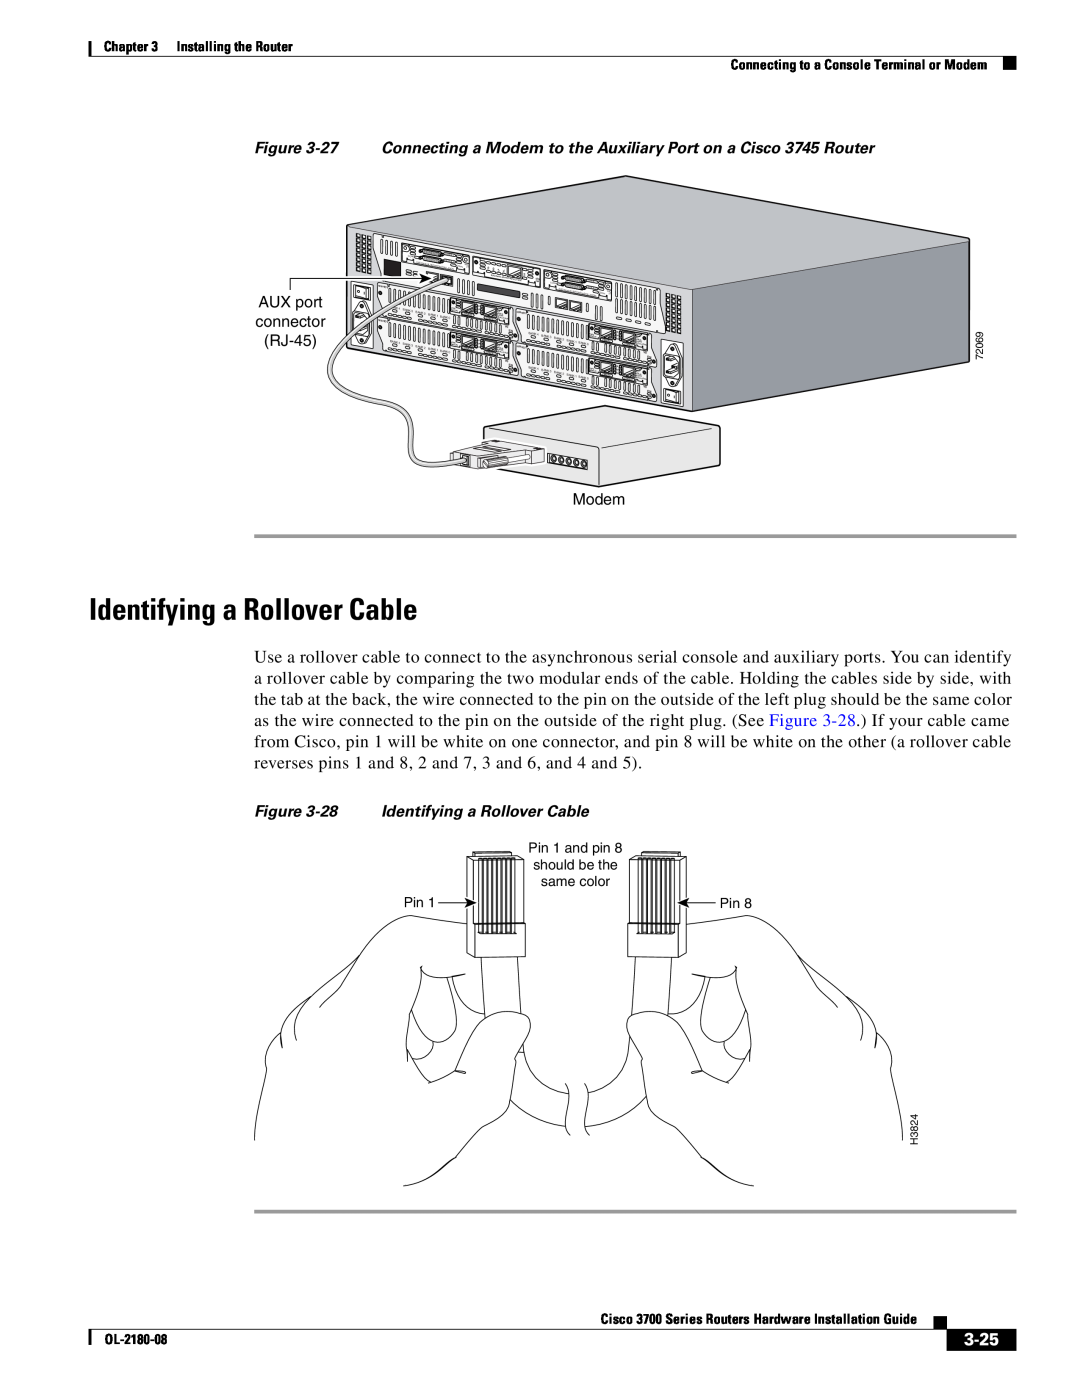 Cisco Systems 3700 Series manual 3-25, 28 Identifying a Rollover Cable 